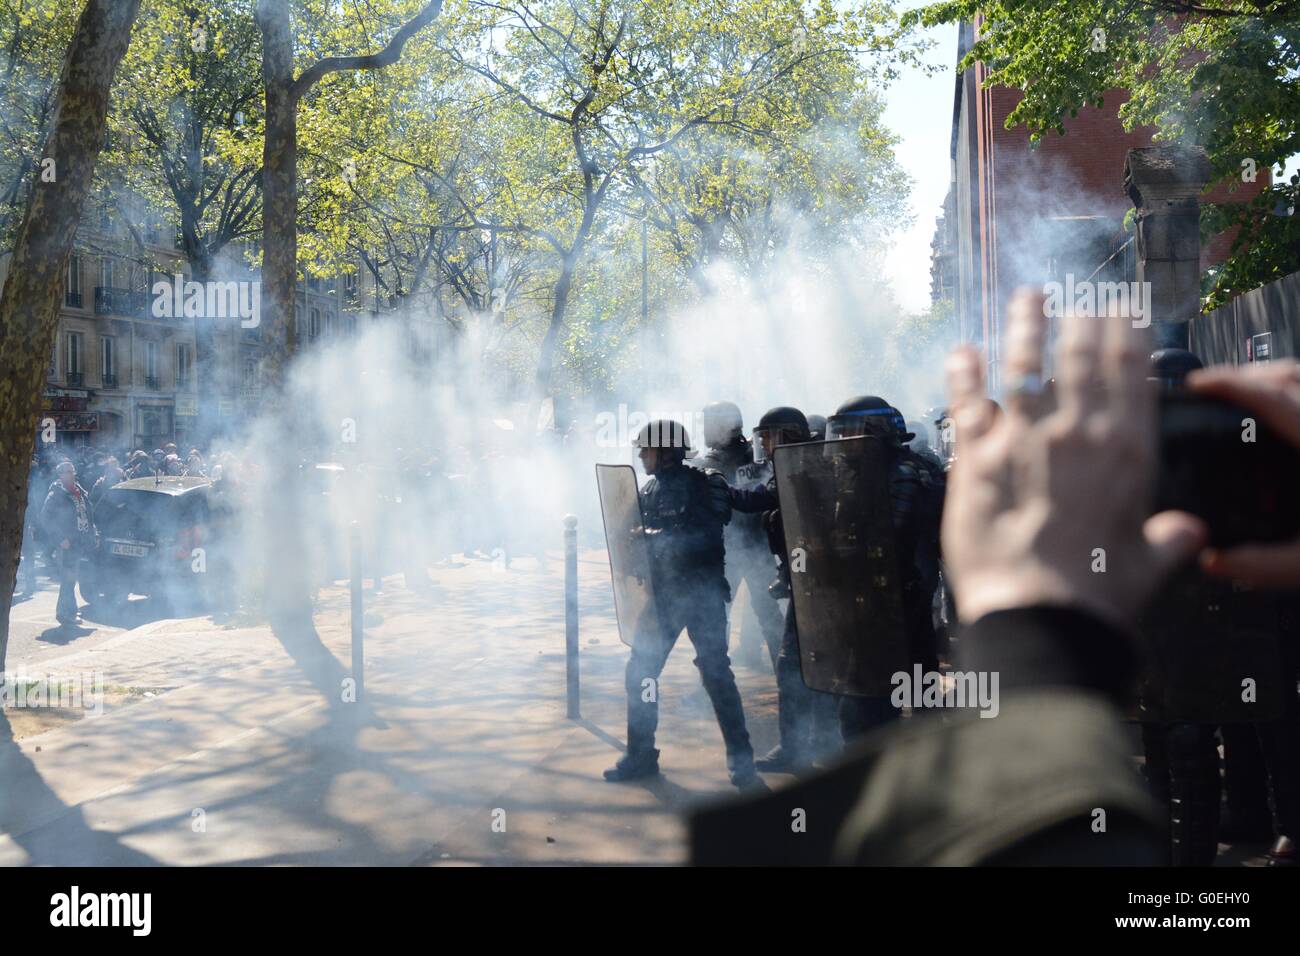 Paris, France. 1 May 2016. Smoke as police struggle to contain the rioting. Credit: Marc Ward/Alamy Live News Stock Photo